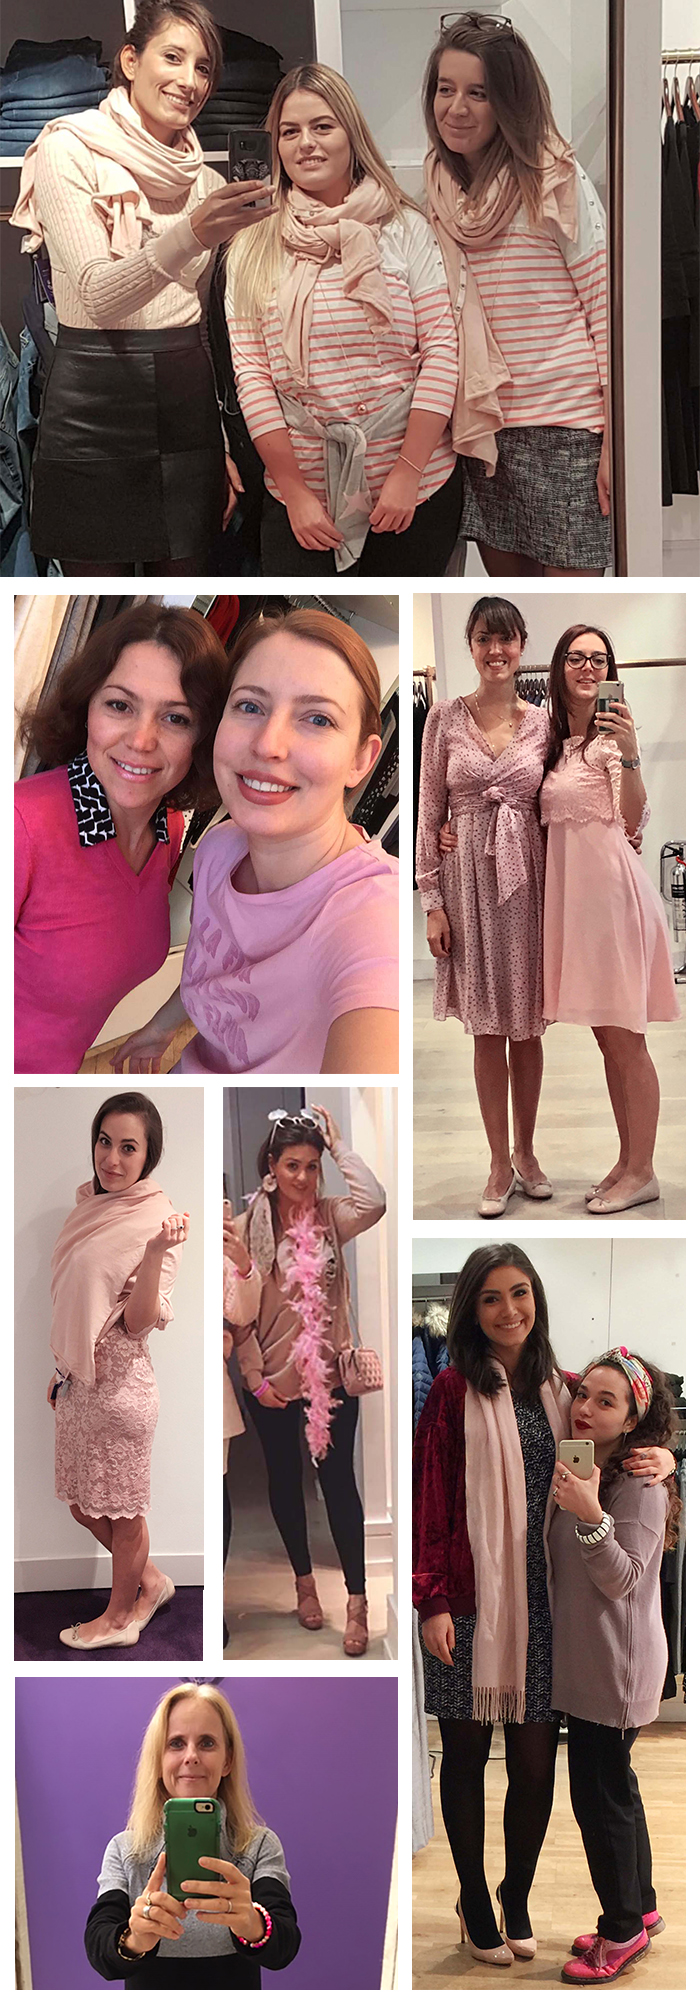 Seraphine store staff wear pink for charity